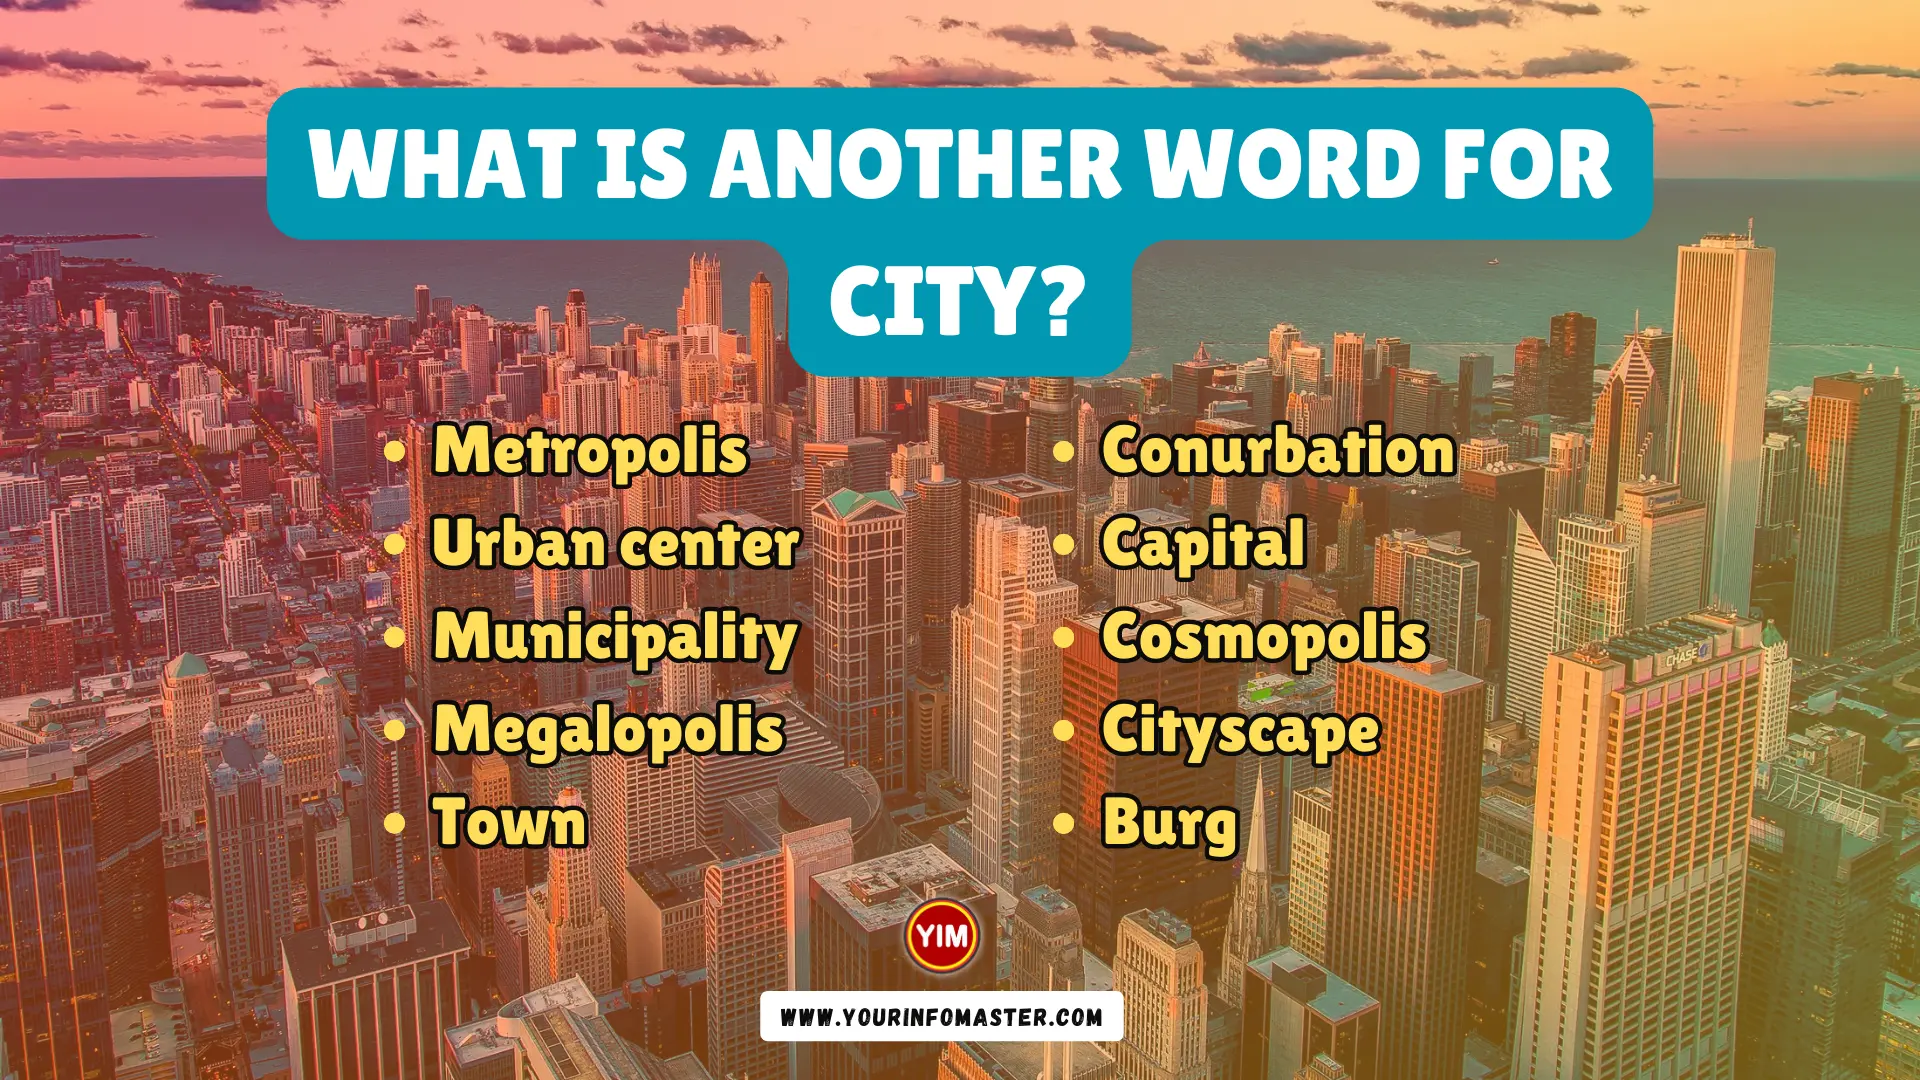 What is another word for City